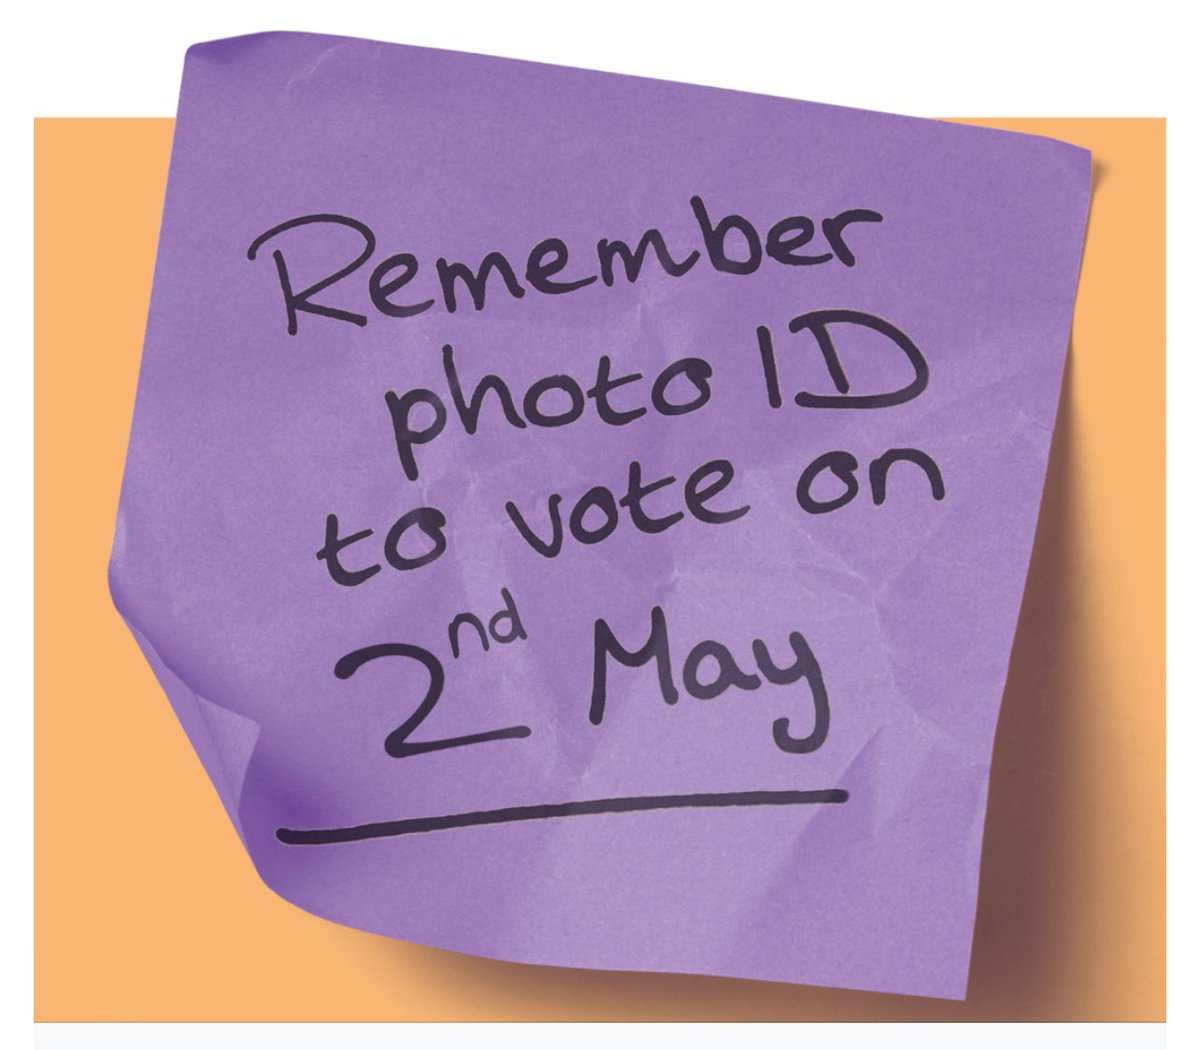 #JQ Polling Stations are open! Don't let your vote sit on the shelf, use it today and: